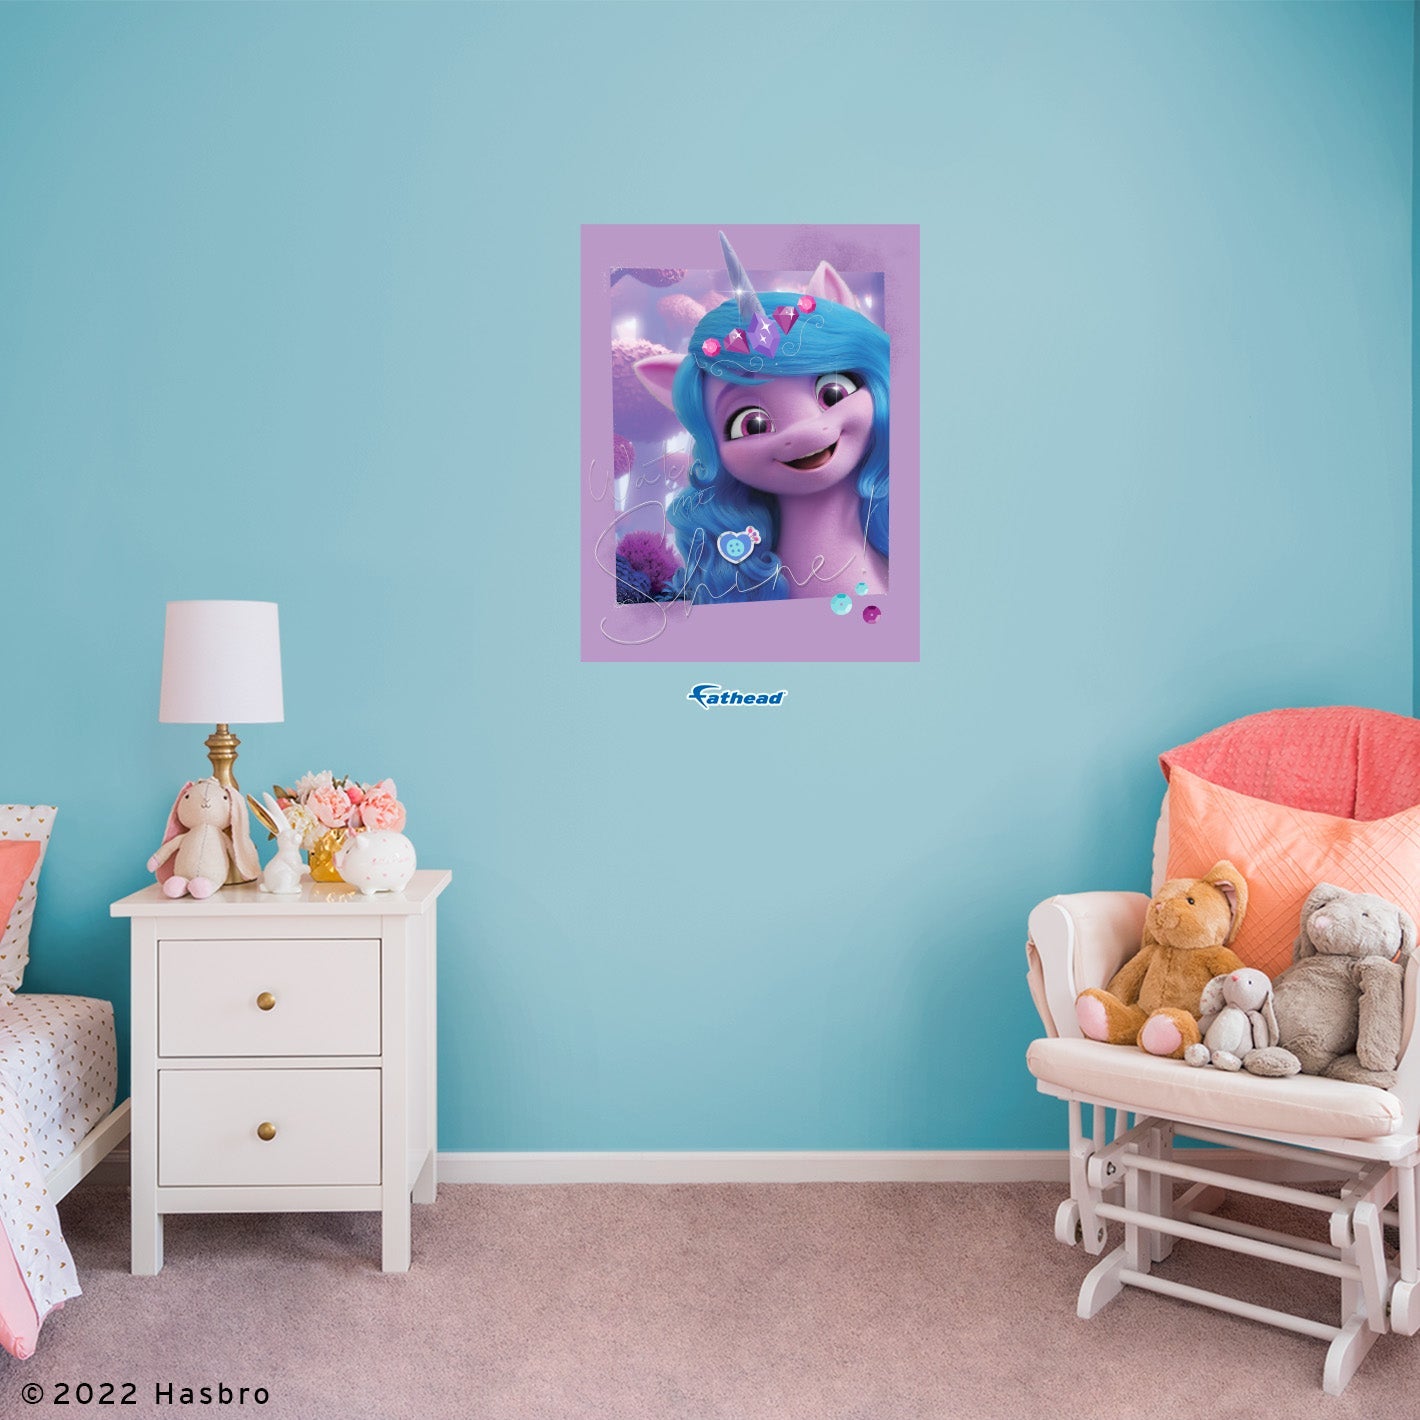 My Little Pony Movie 2: Watch Me Shine Poster - Officially Licensed Hasbro Removable Adhesive Decal